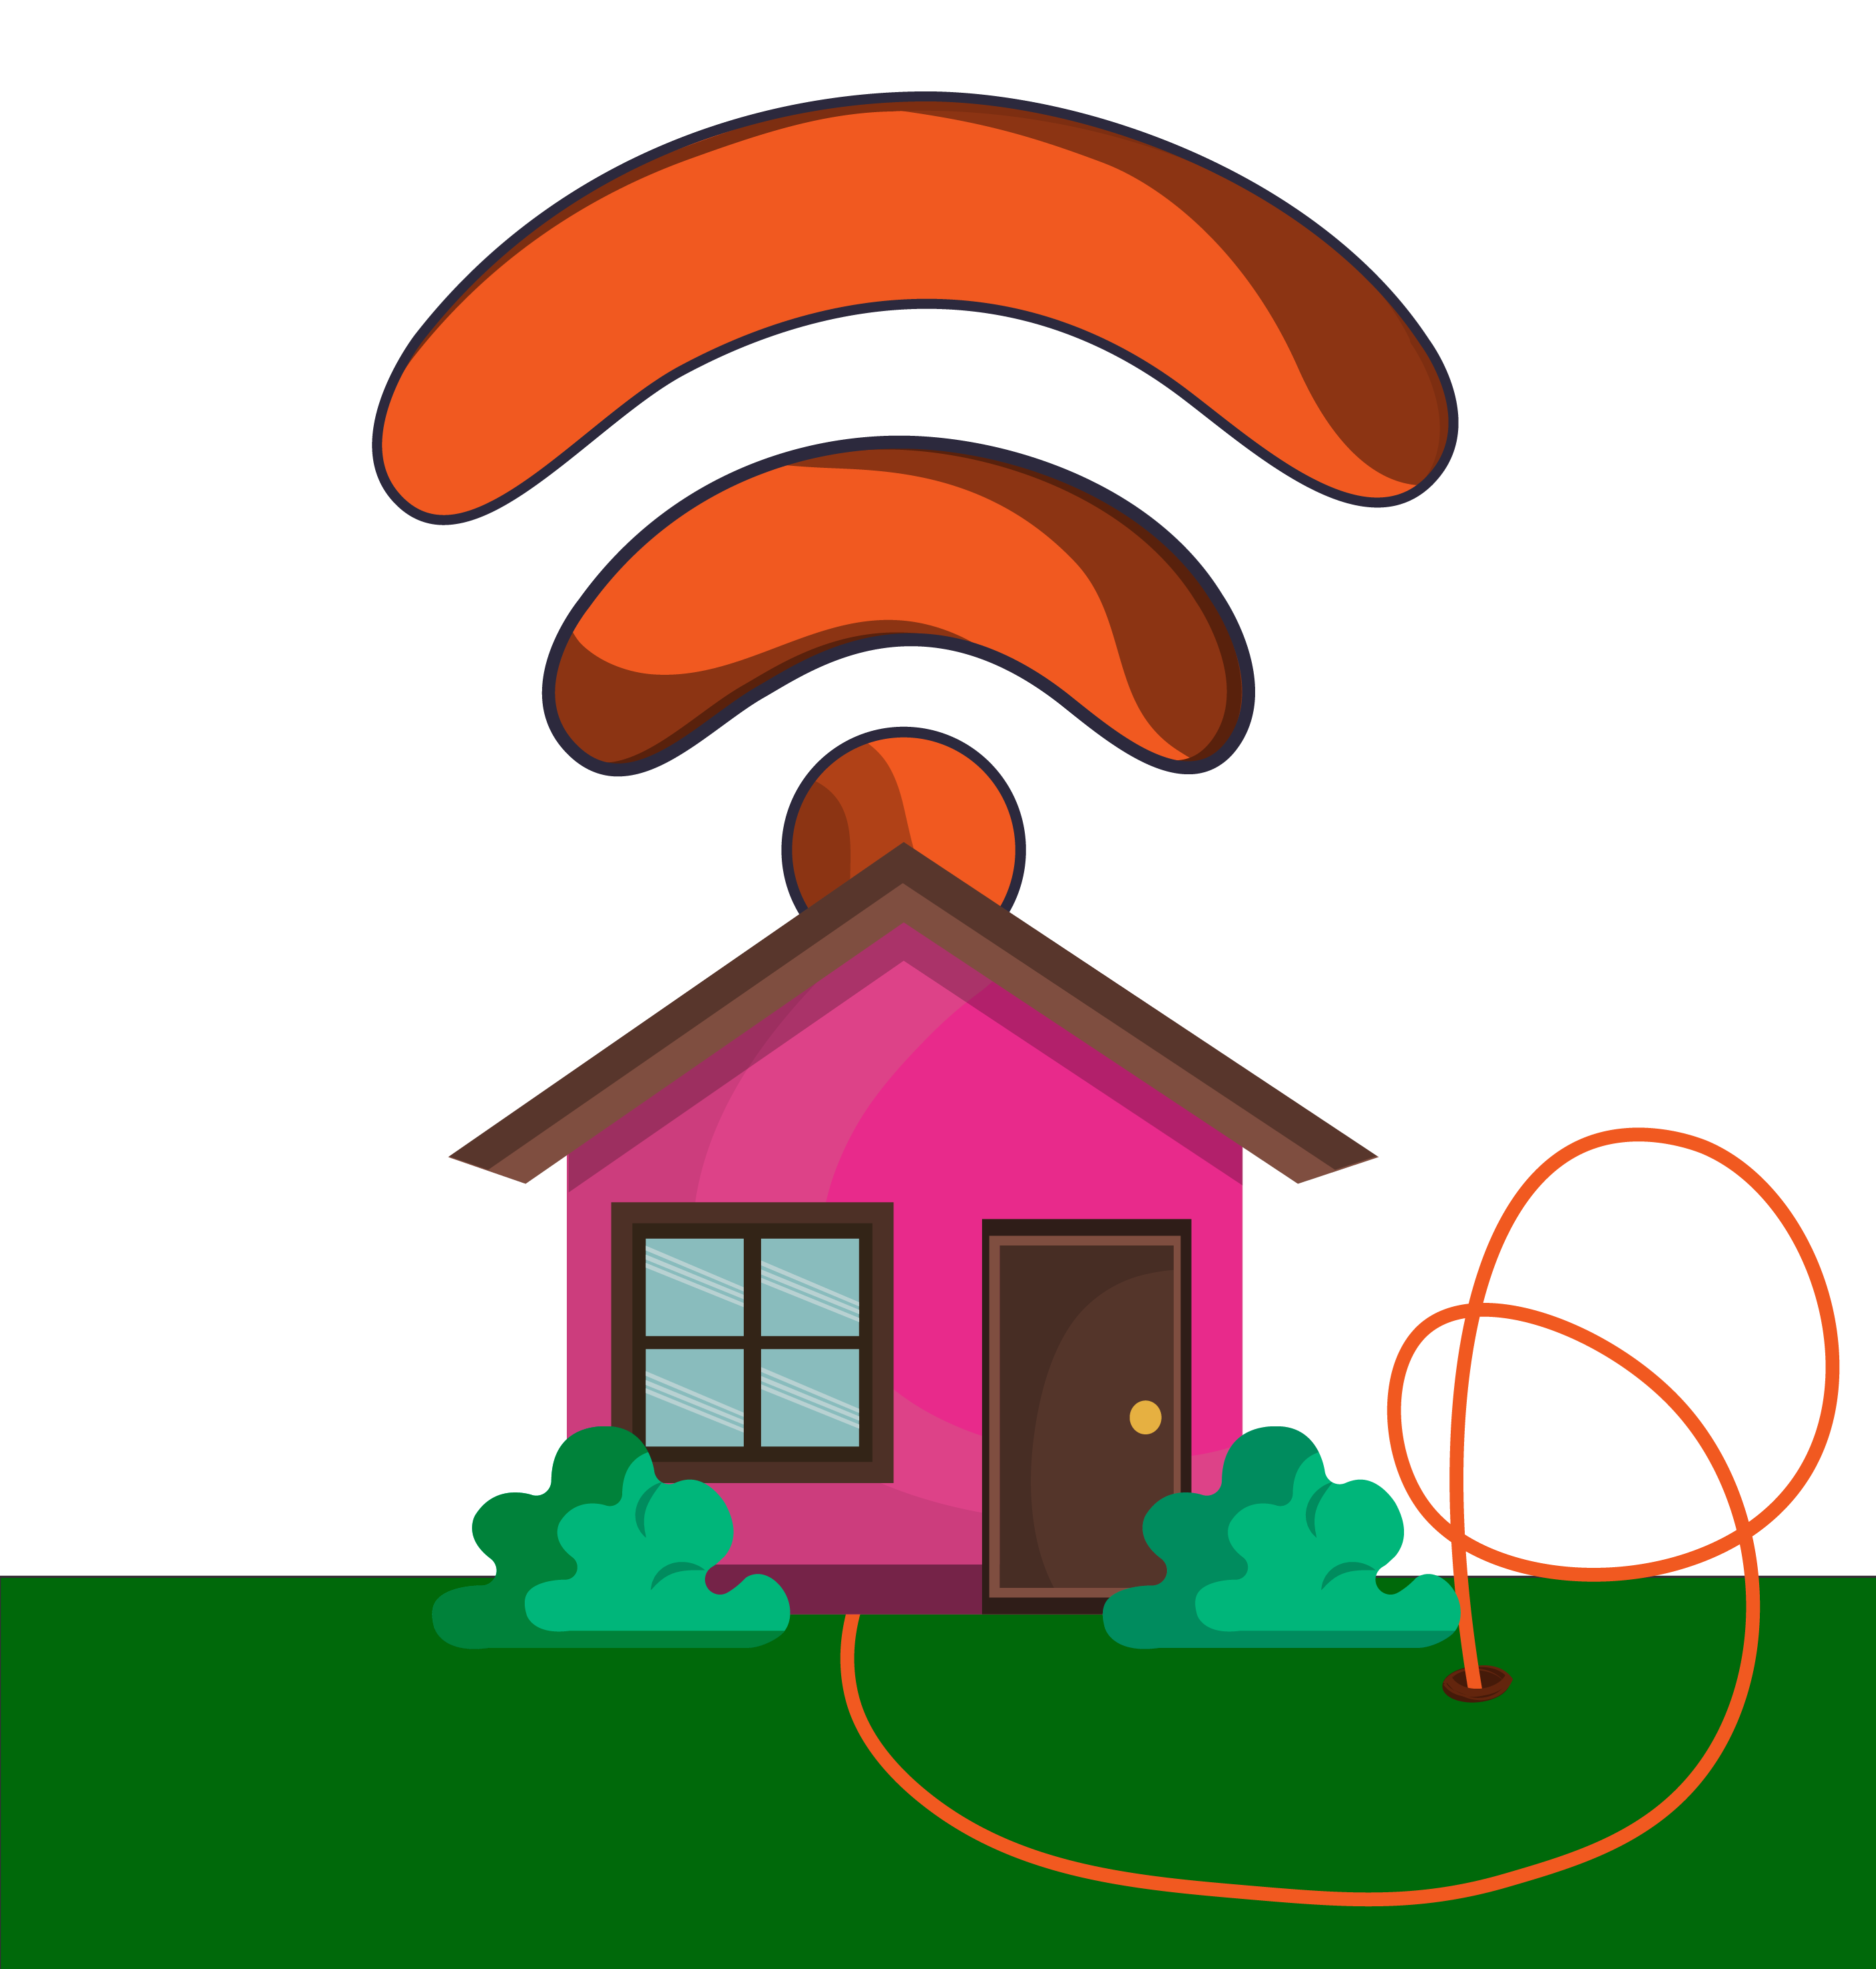 Home connected with copper line.